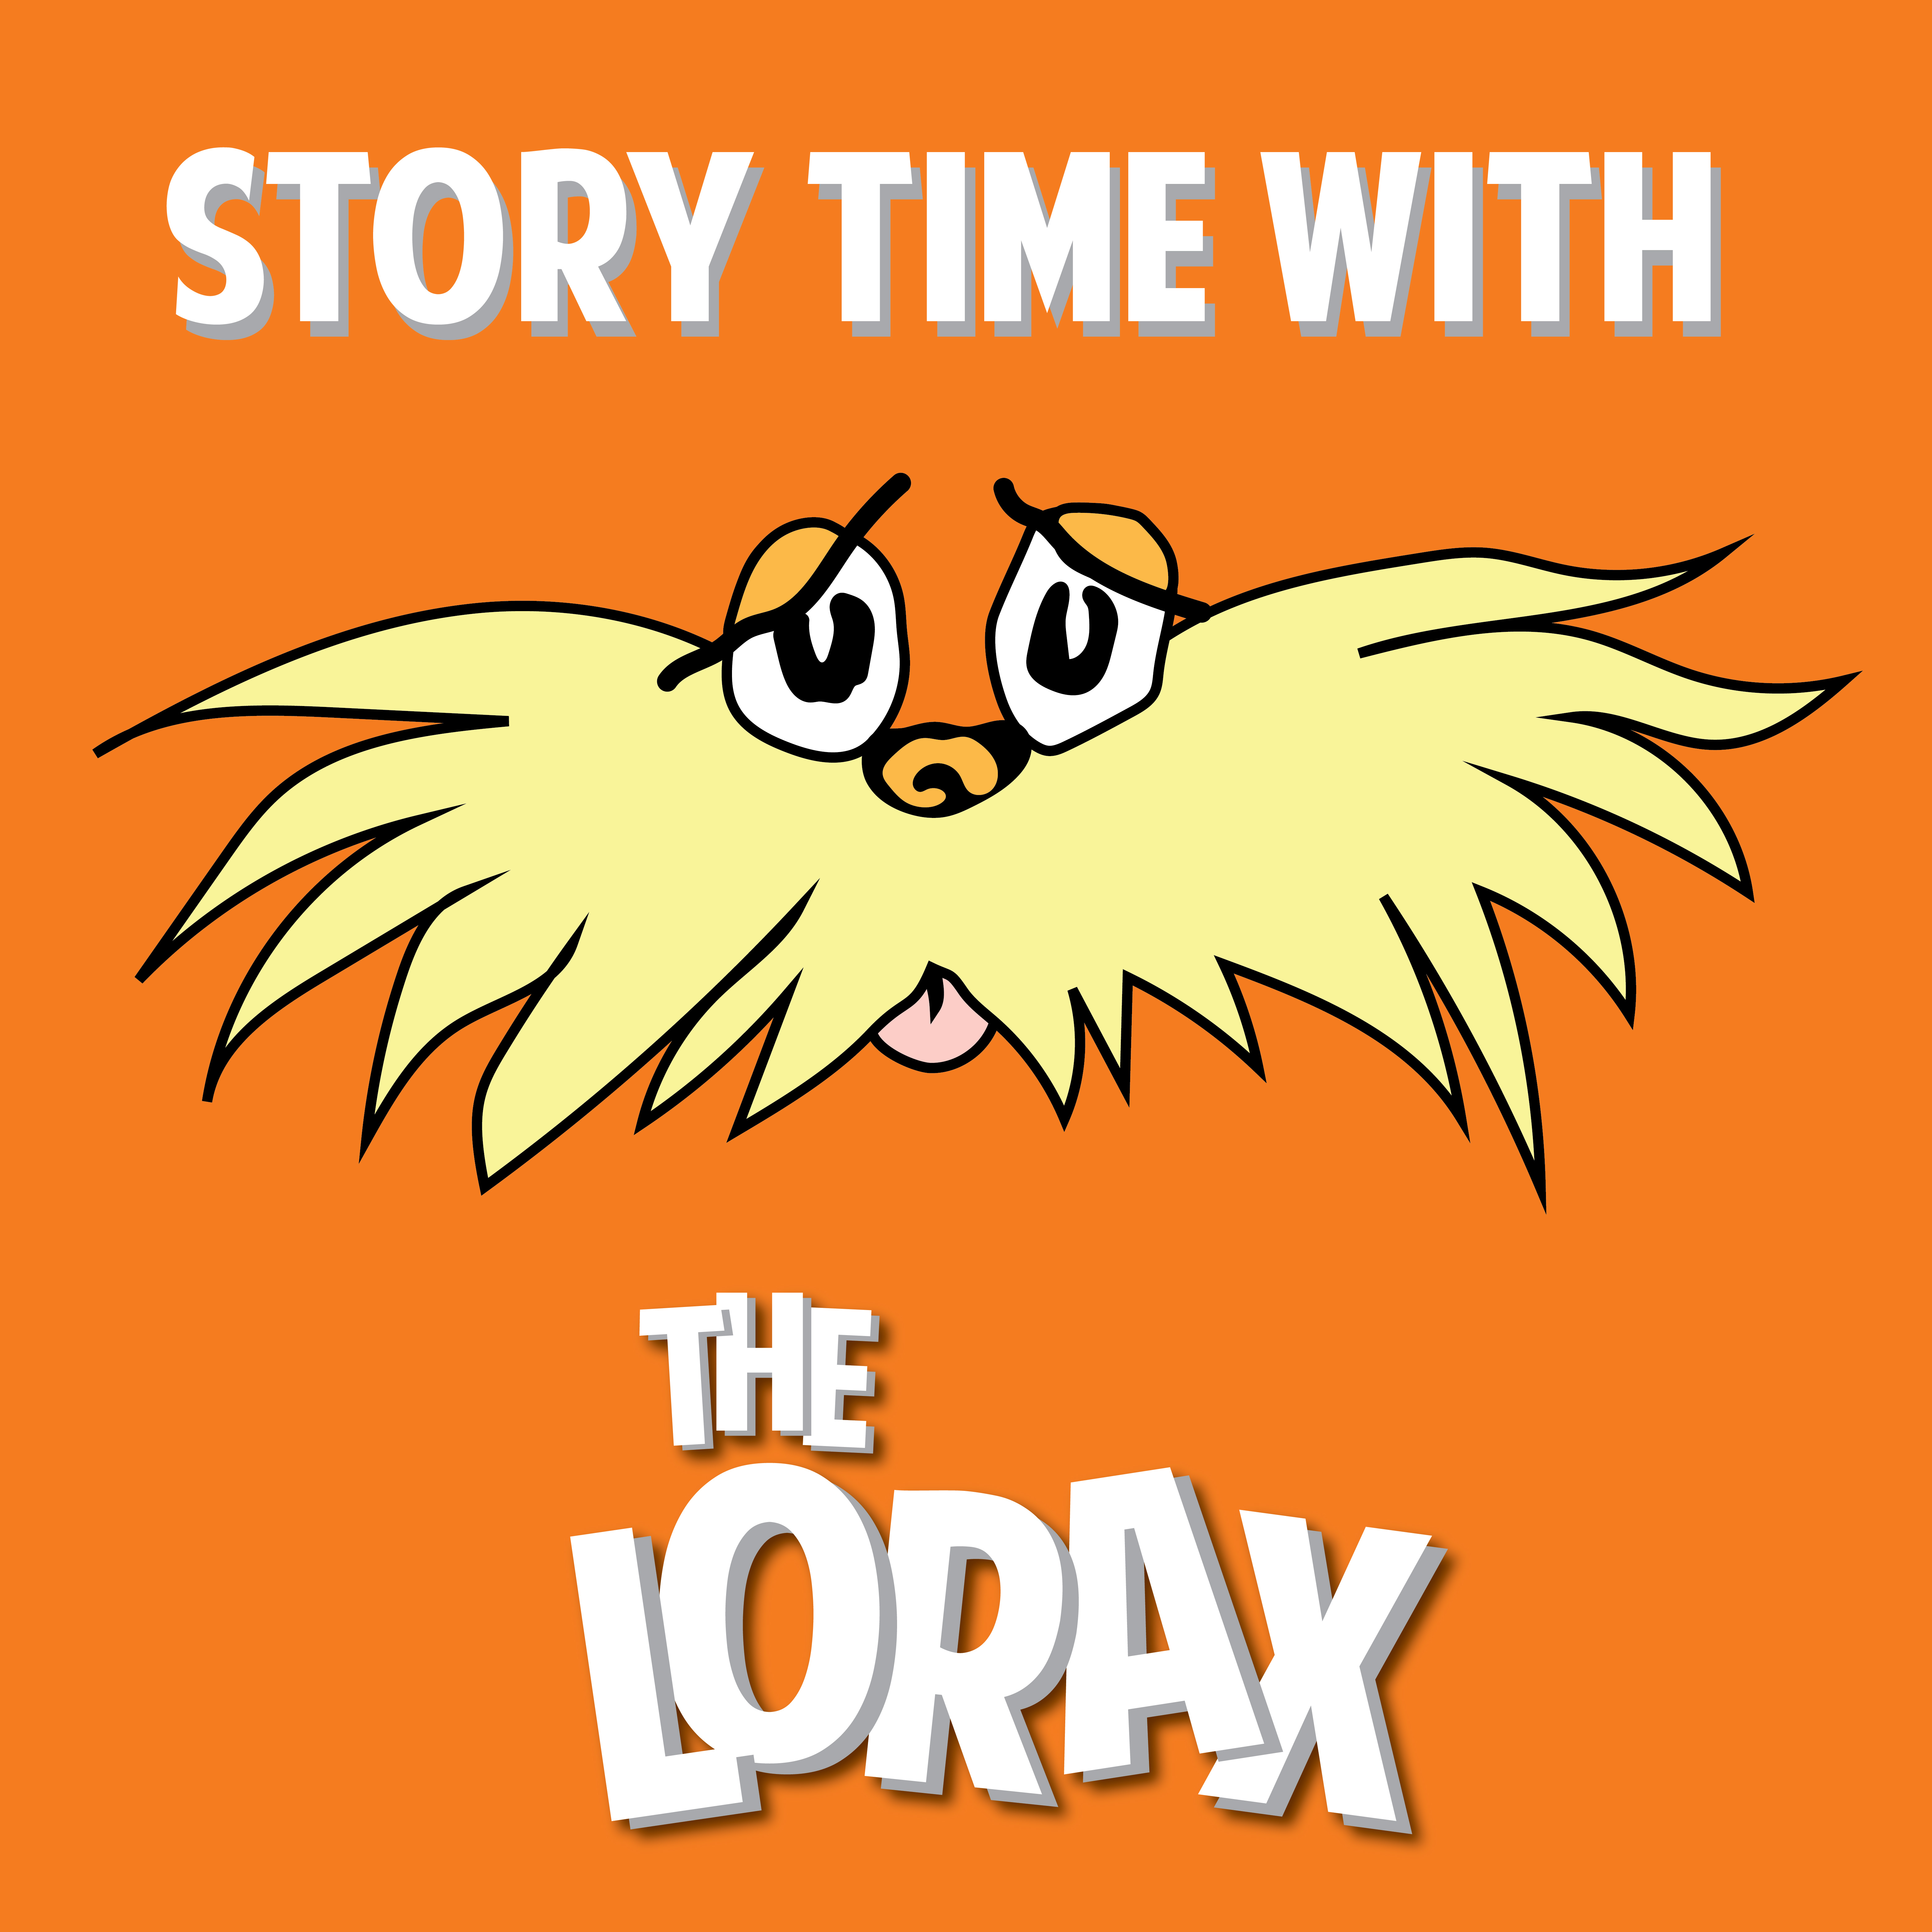 story-time-with-the-lorax-events-calendar-iowa-state-university